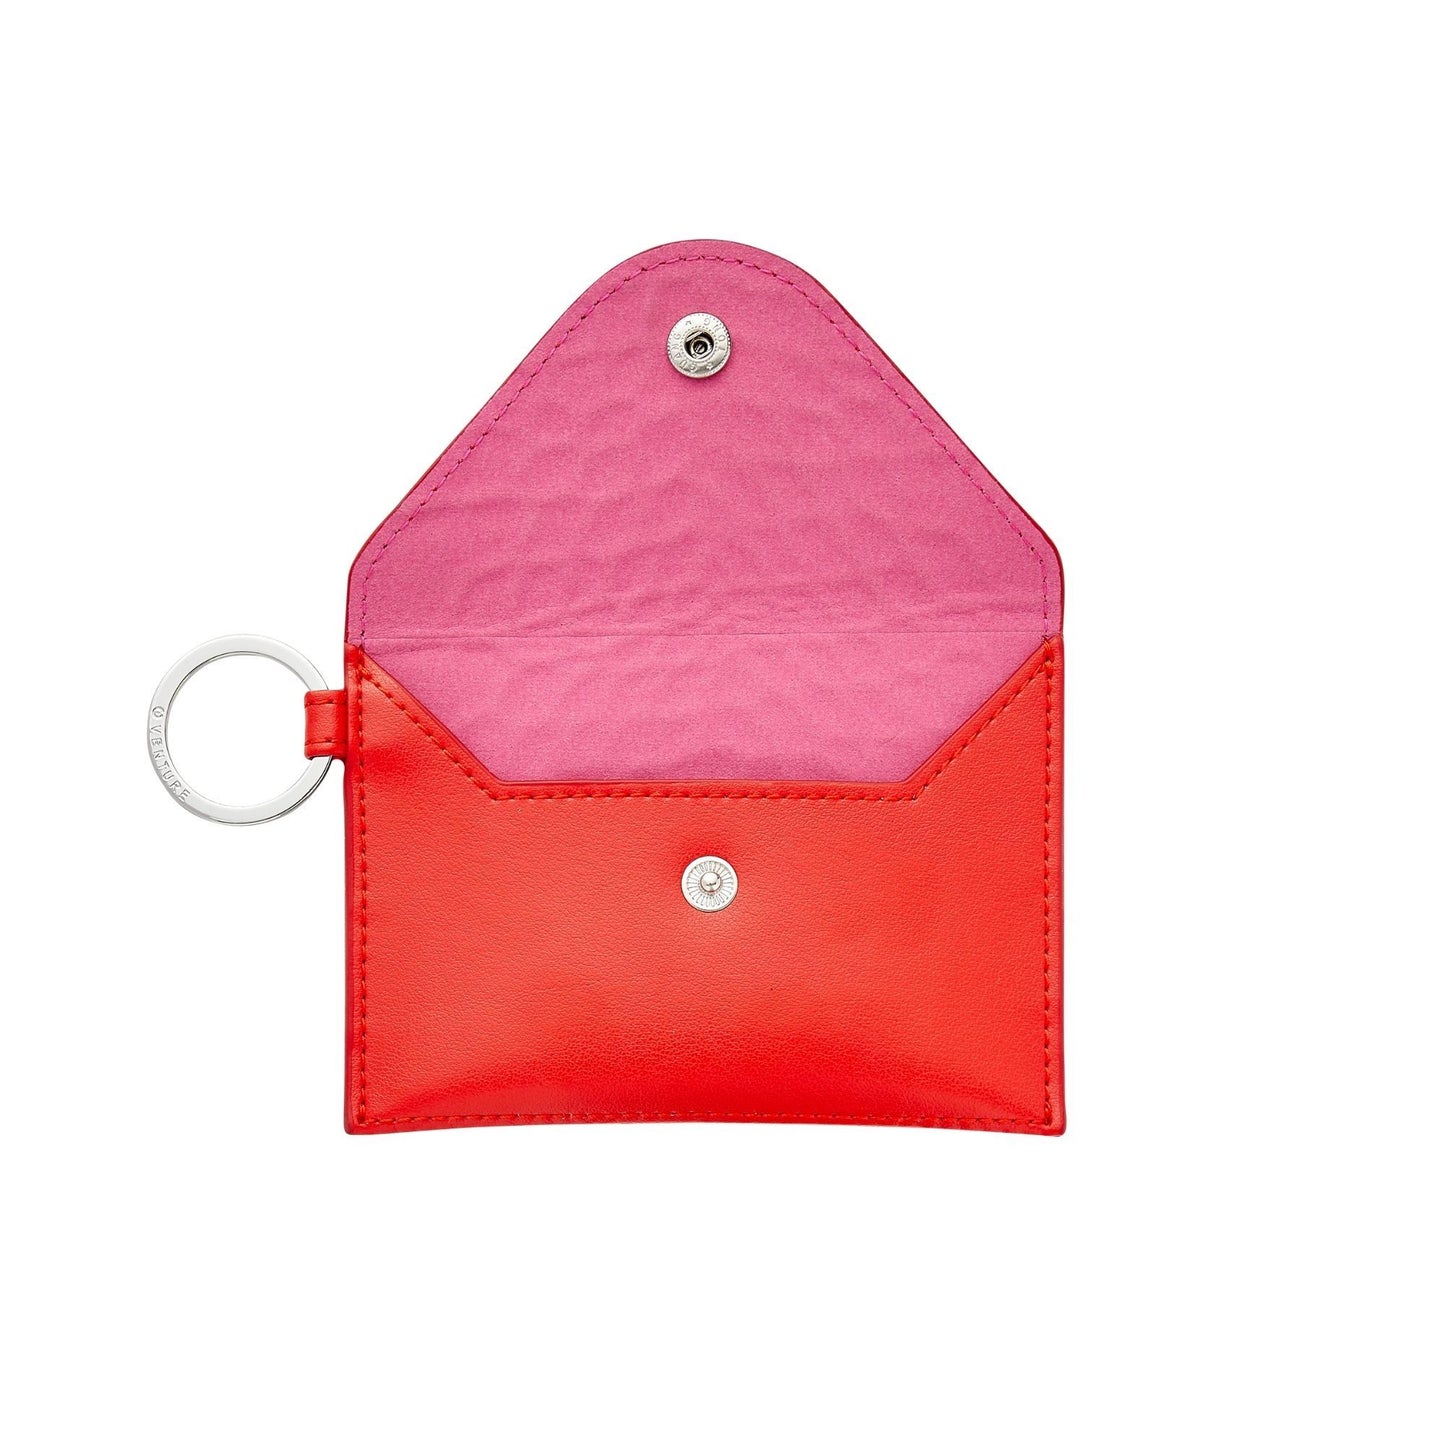 Cherry On Top Croc-Embossed - Mini Envelope Wallet - Oventure with hot pink microfiber liner shown inside